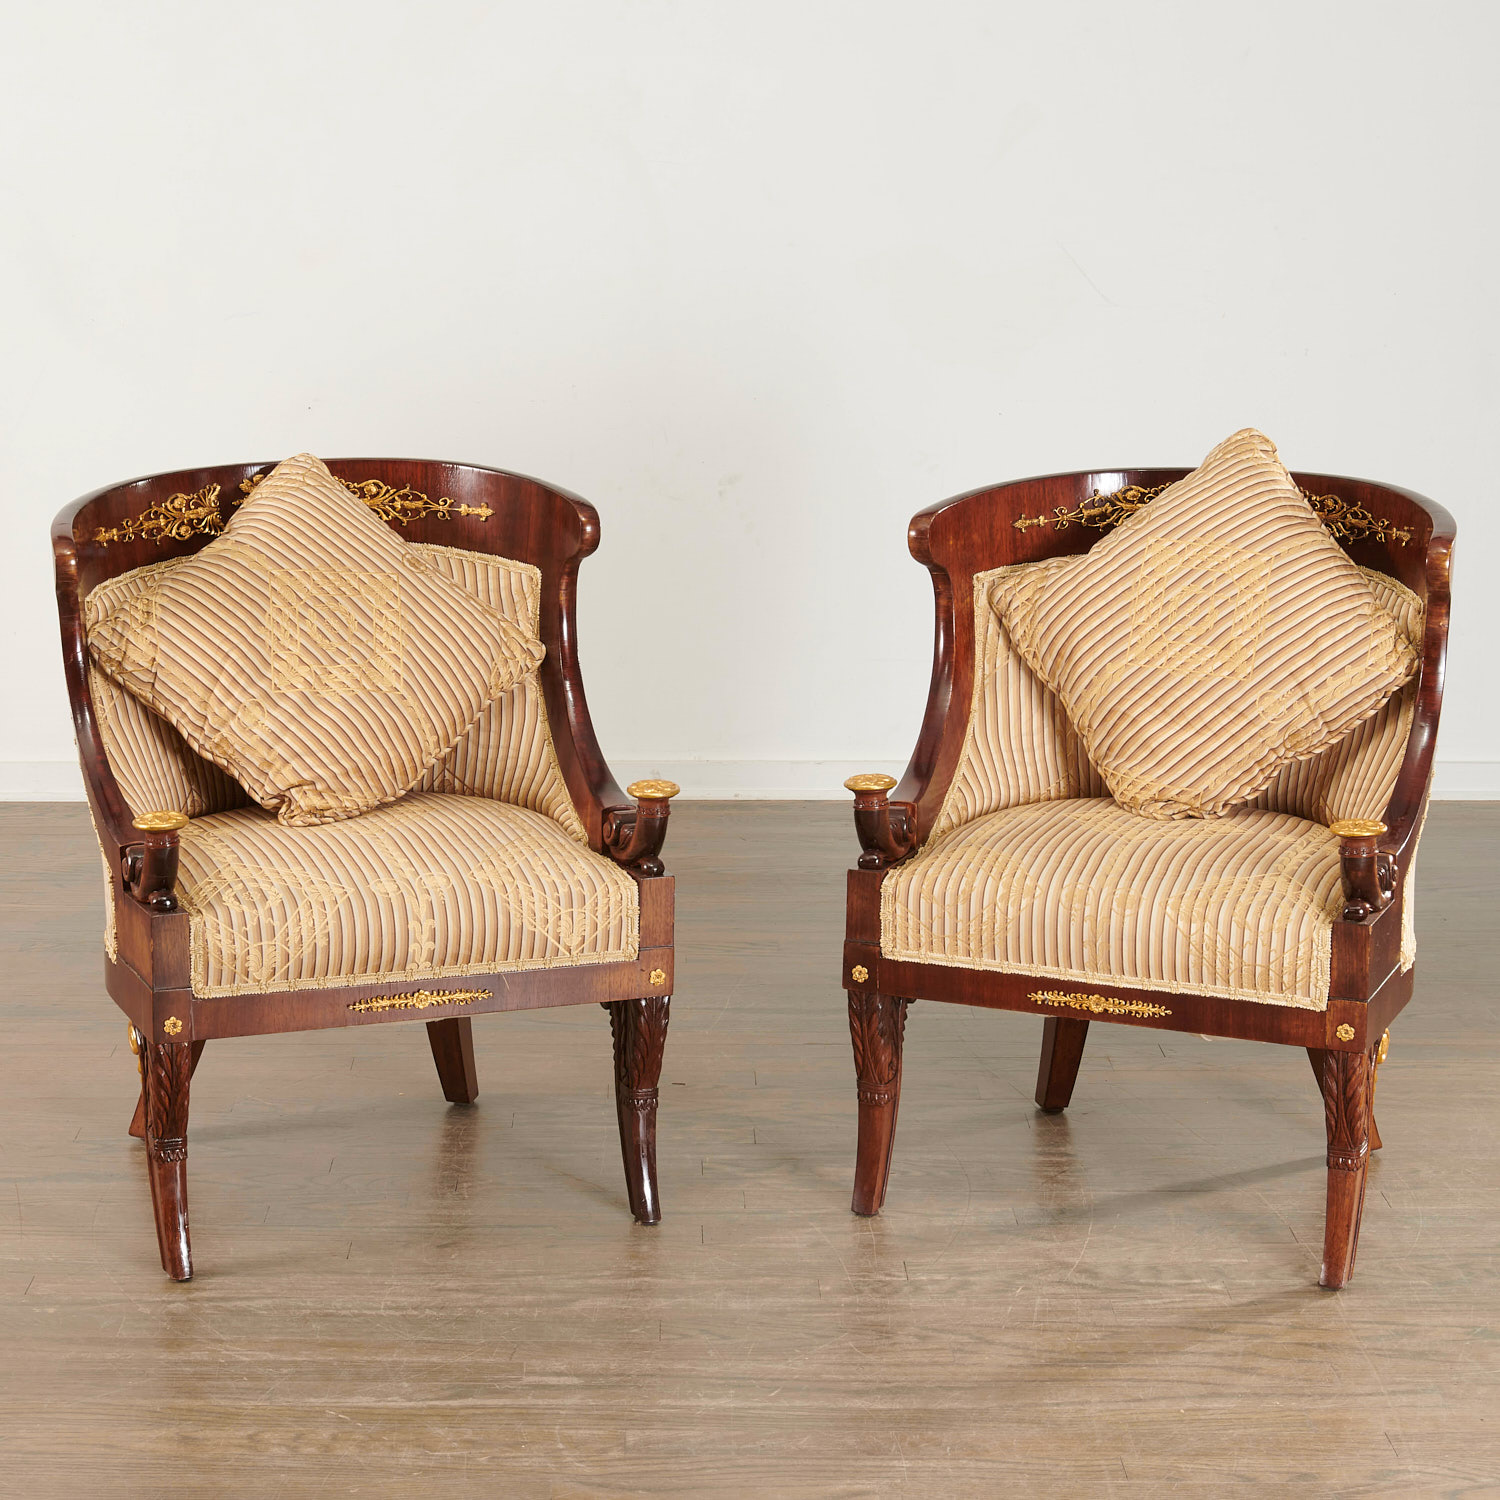 (3) piece French Empire style mahogany salon suite - Image 6 of 10